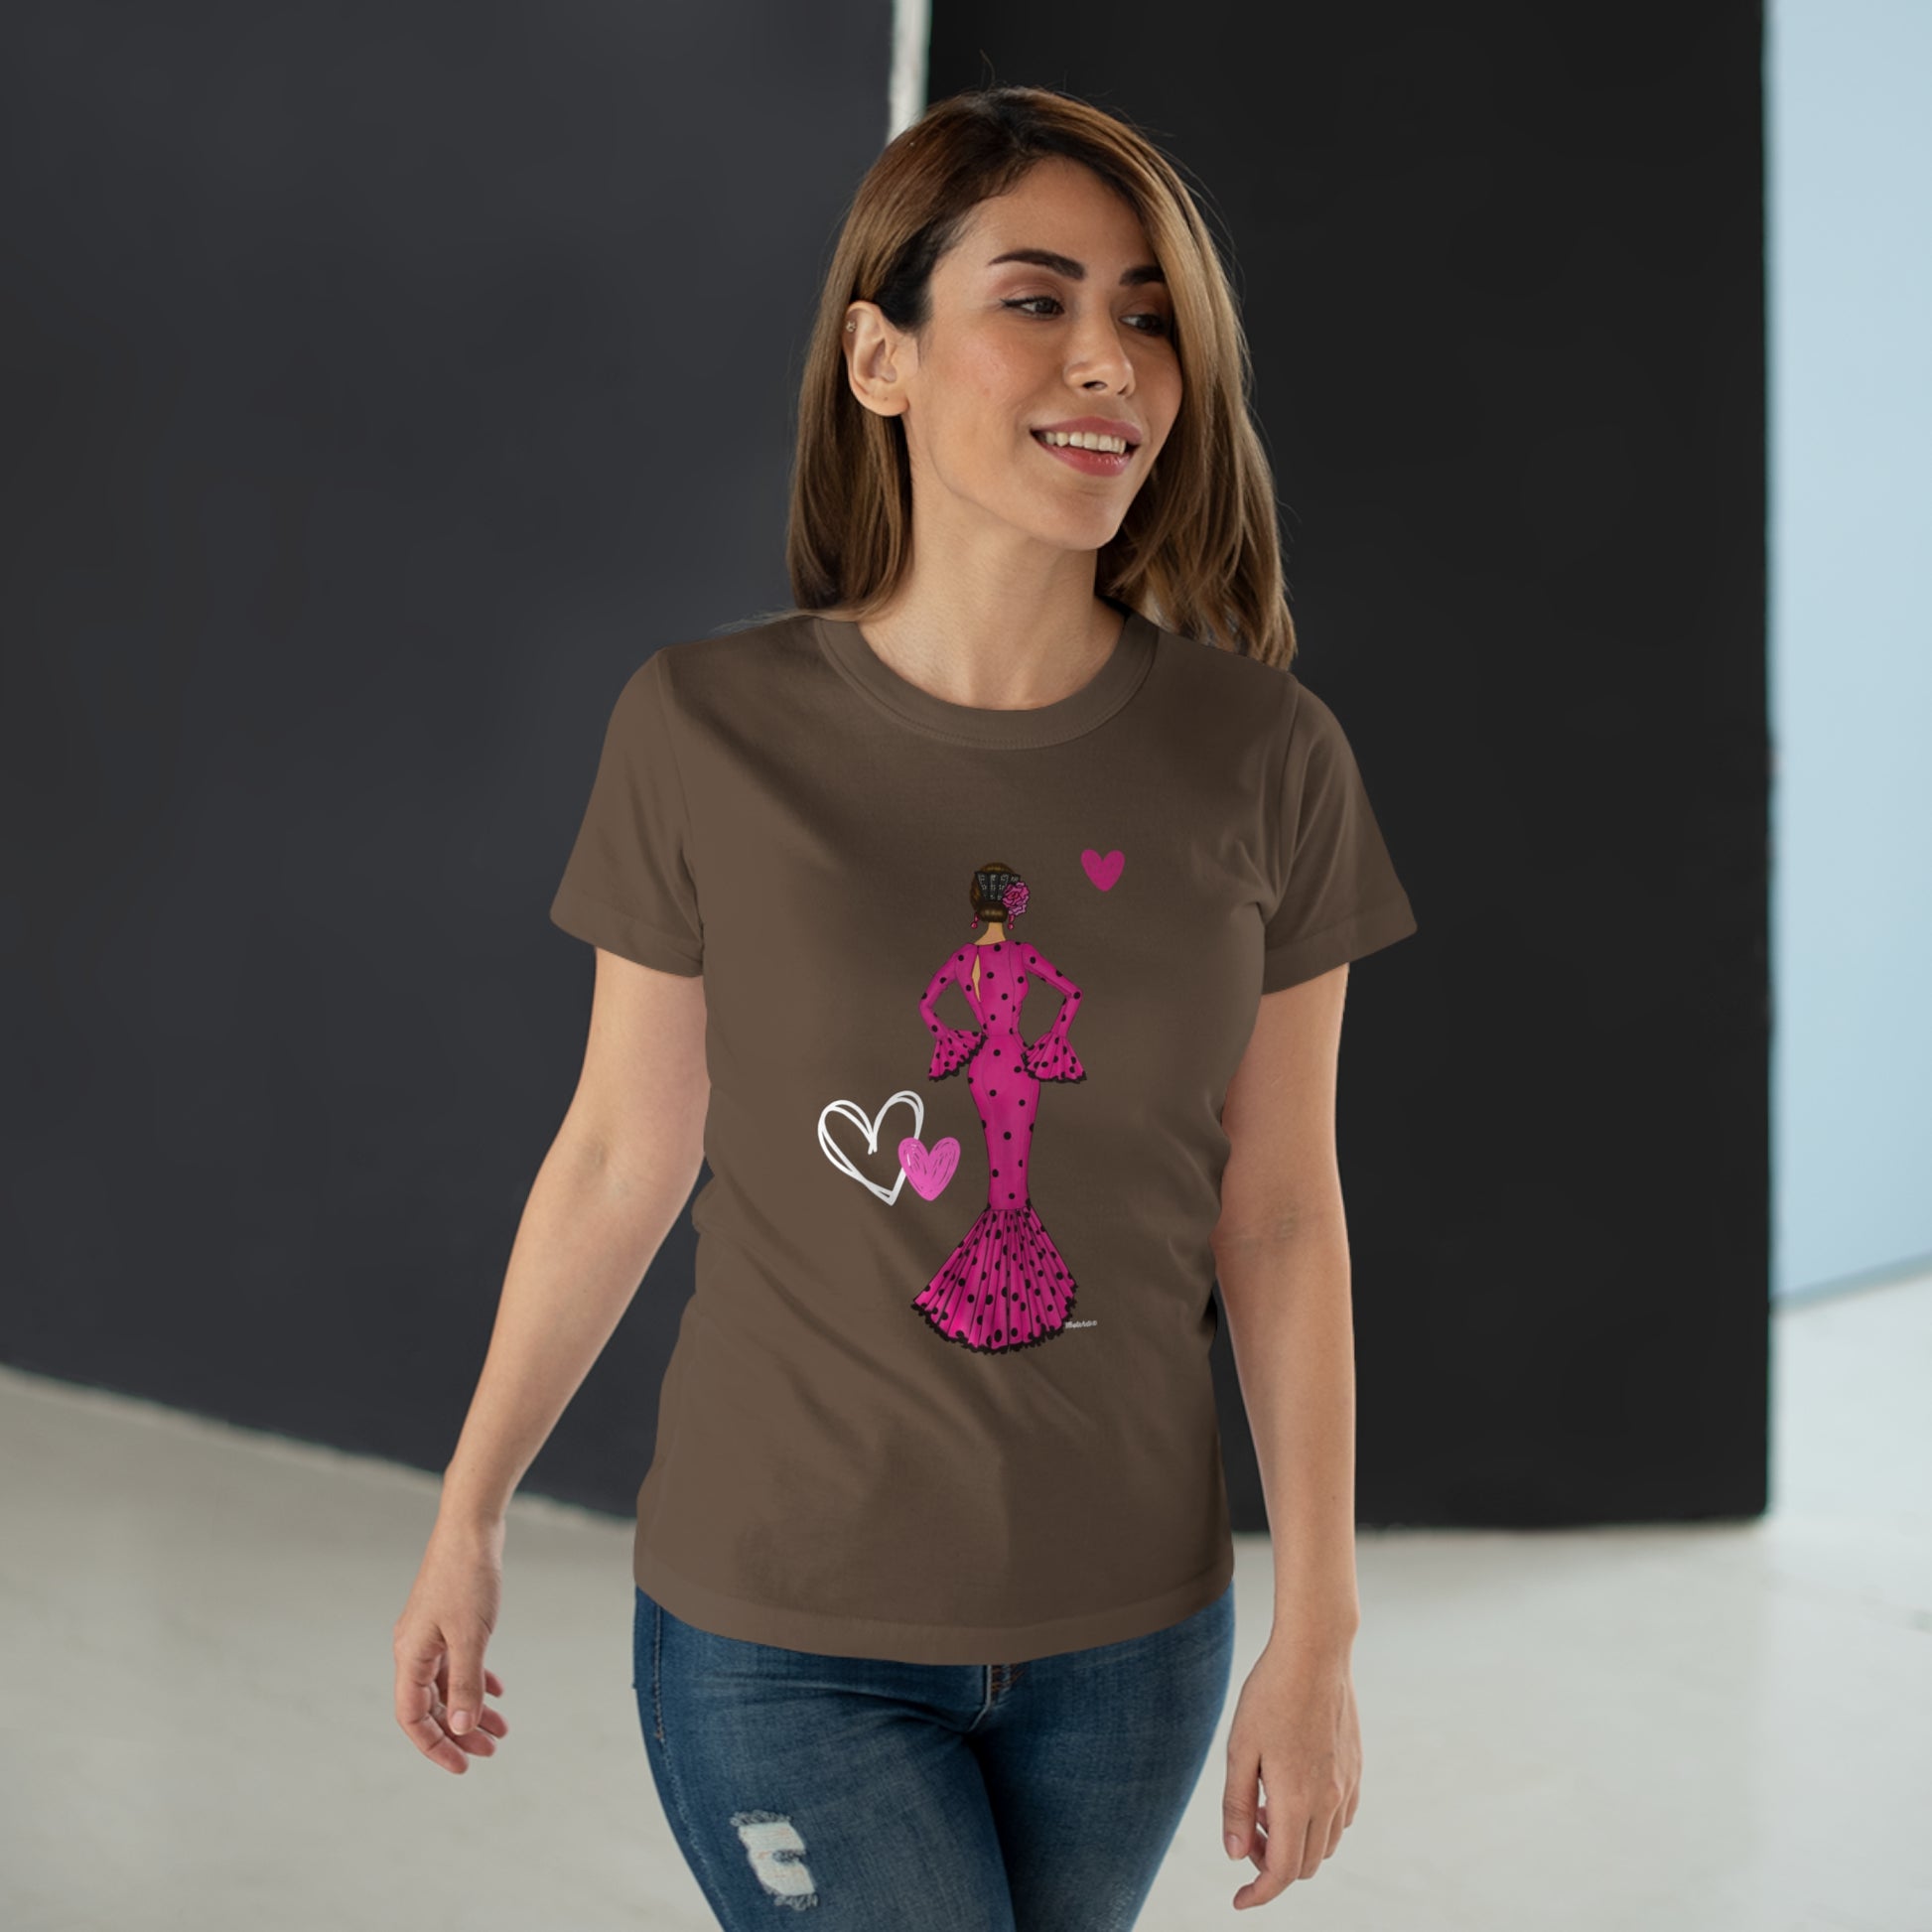 a woman wearing a t - shirt with a pink minnie mouse on it